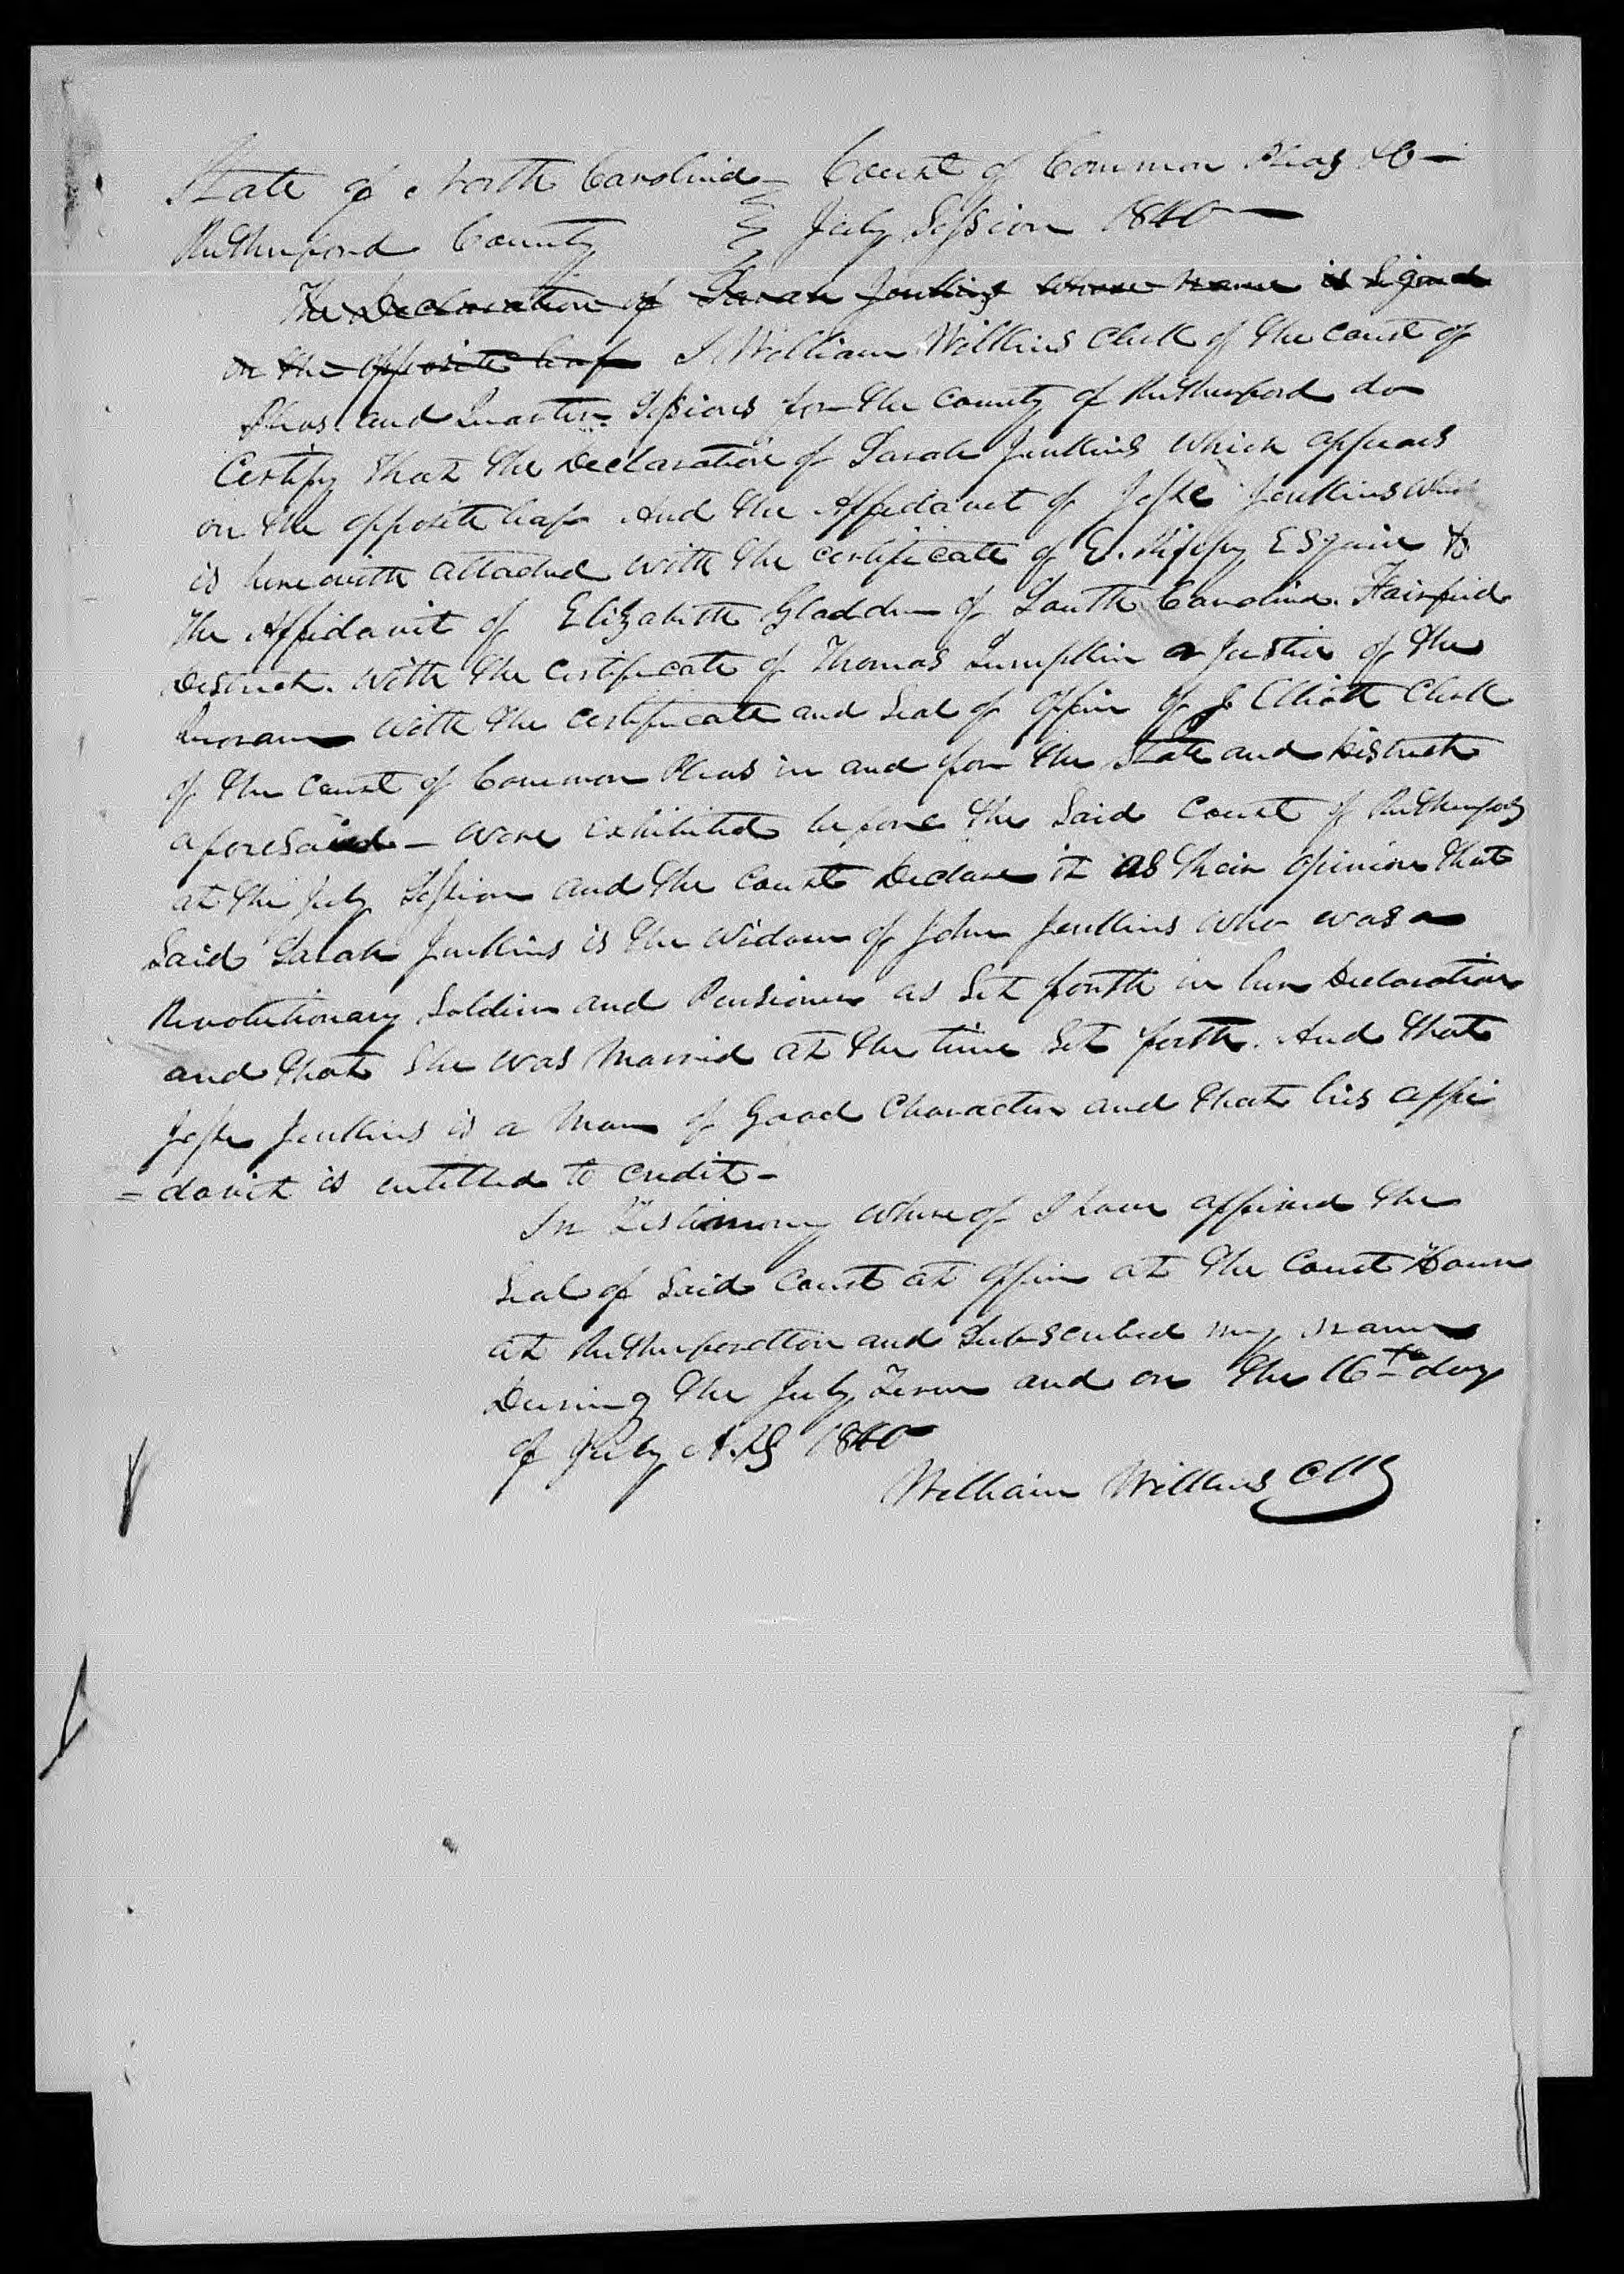 Application for a Widow's Pension from Sarah Jenkins, 16 November 1839, page 5